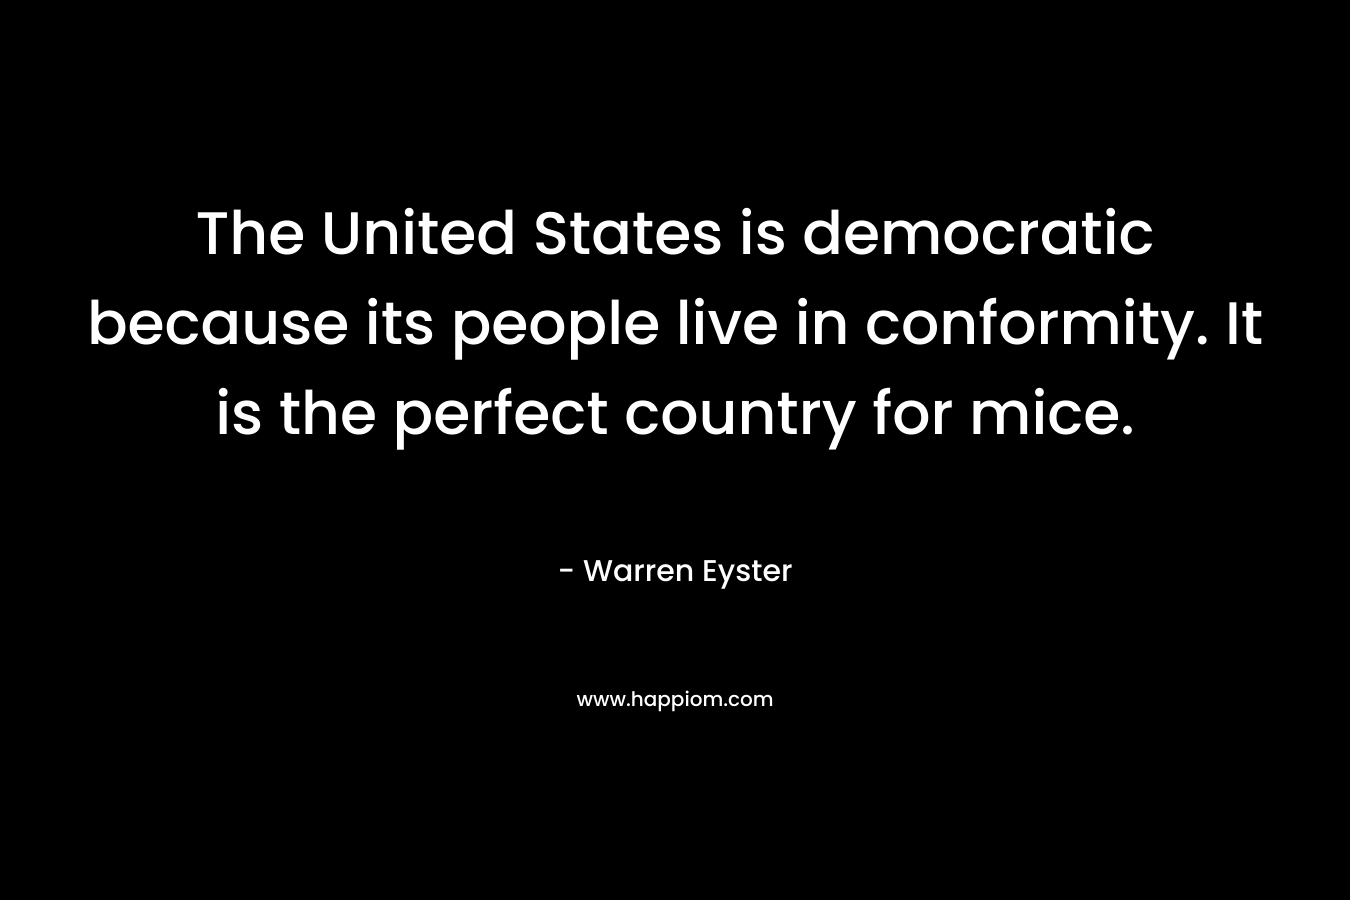 The United States is democratic because its people live in conformity. It is the perfect country for mice.